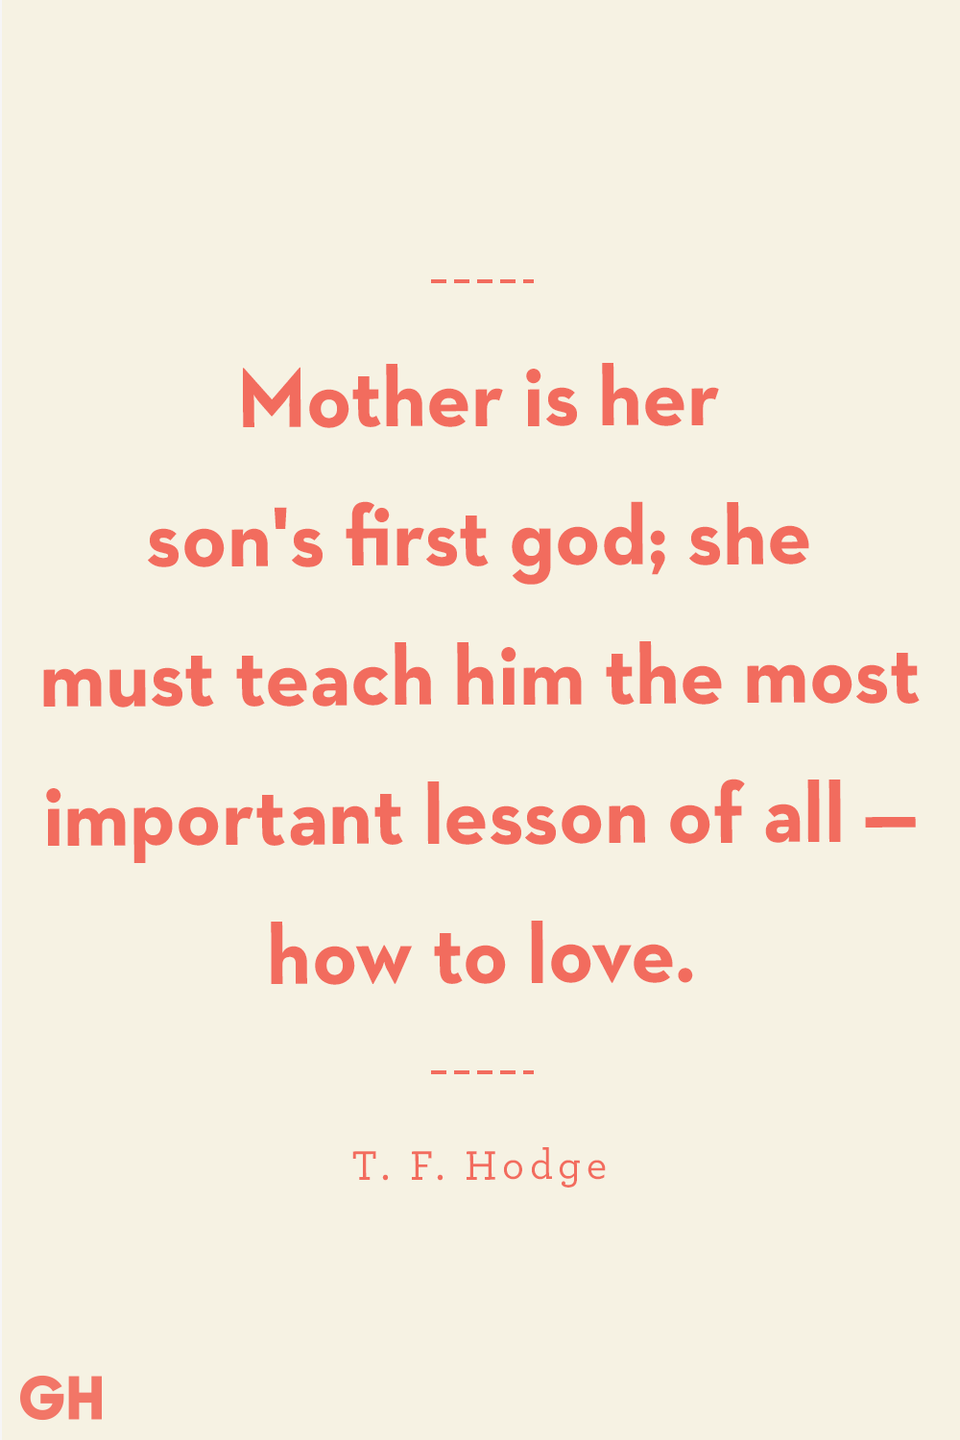 <p>Mother is her son's first god; she must teach him the most important lesson of all — how to love.</p>